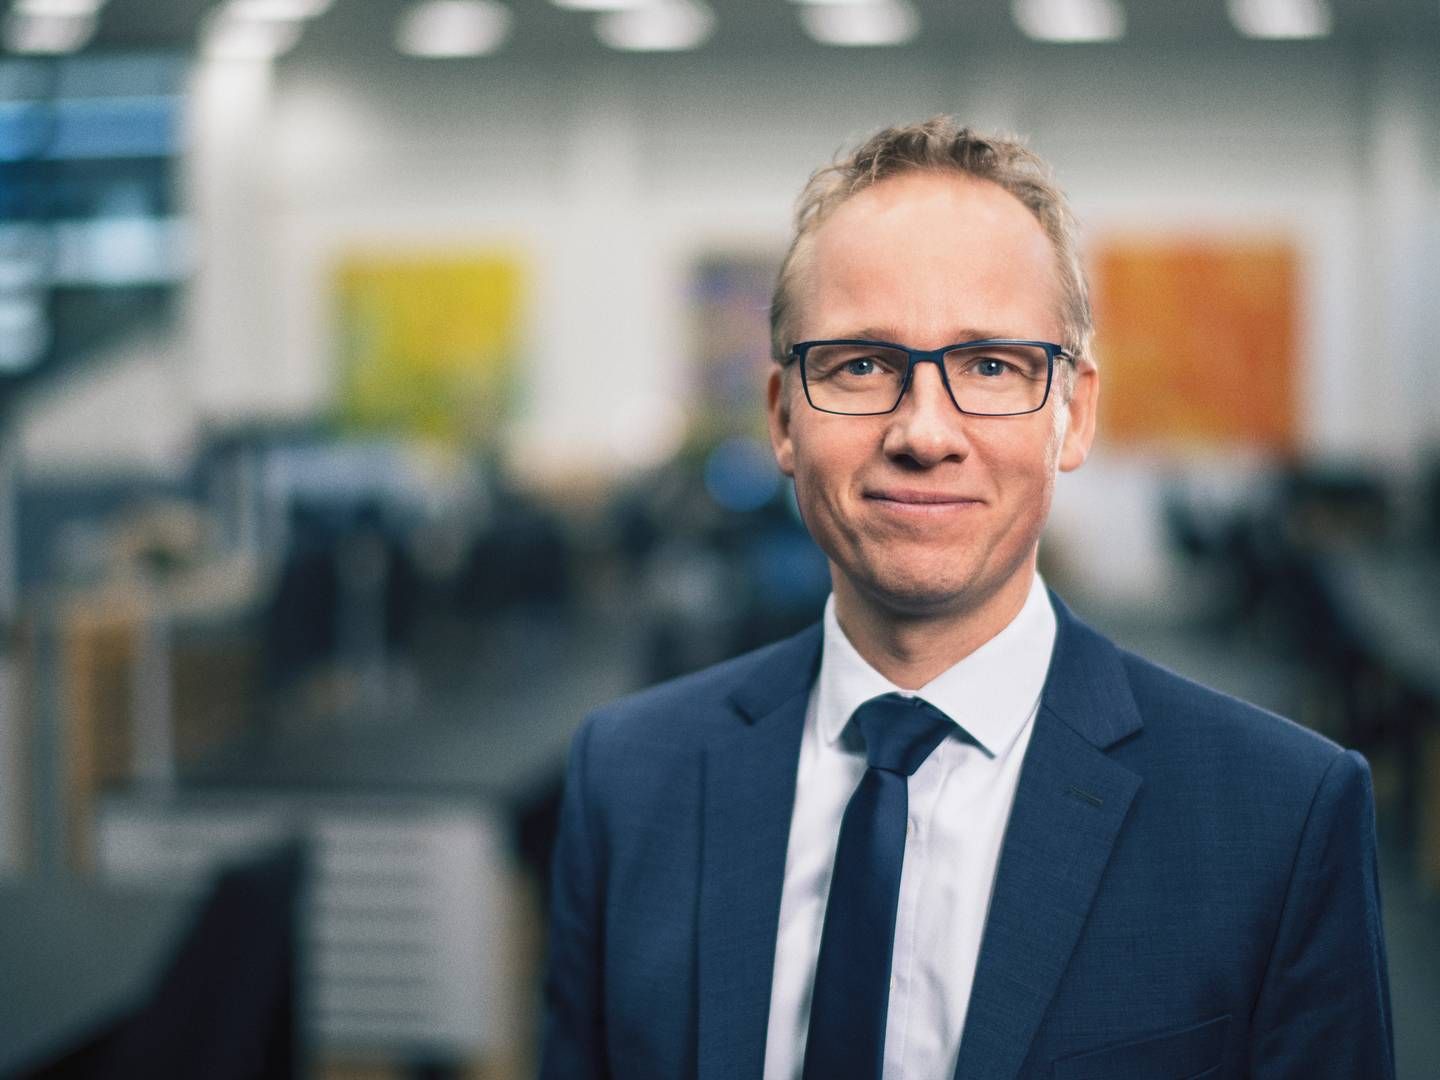 Jacob Pedersen, Head of Equity Research at Sydbank. | Photo: Pr